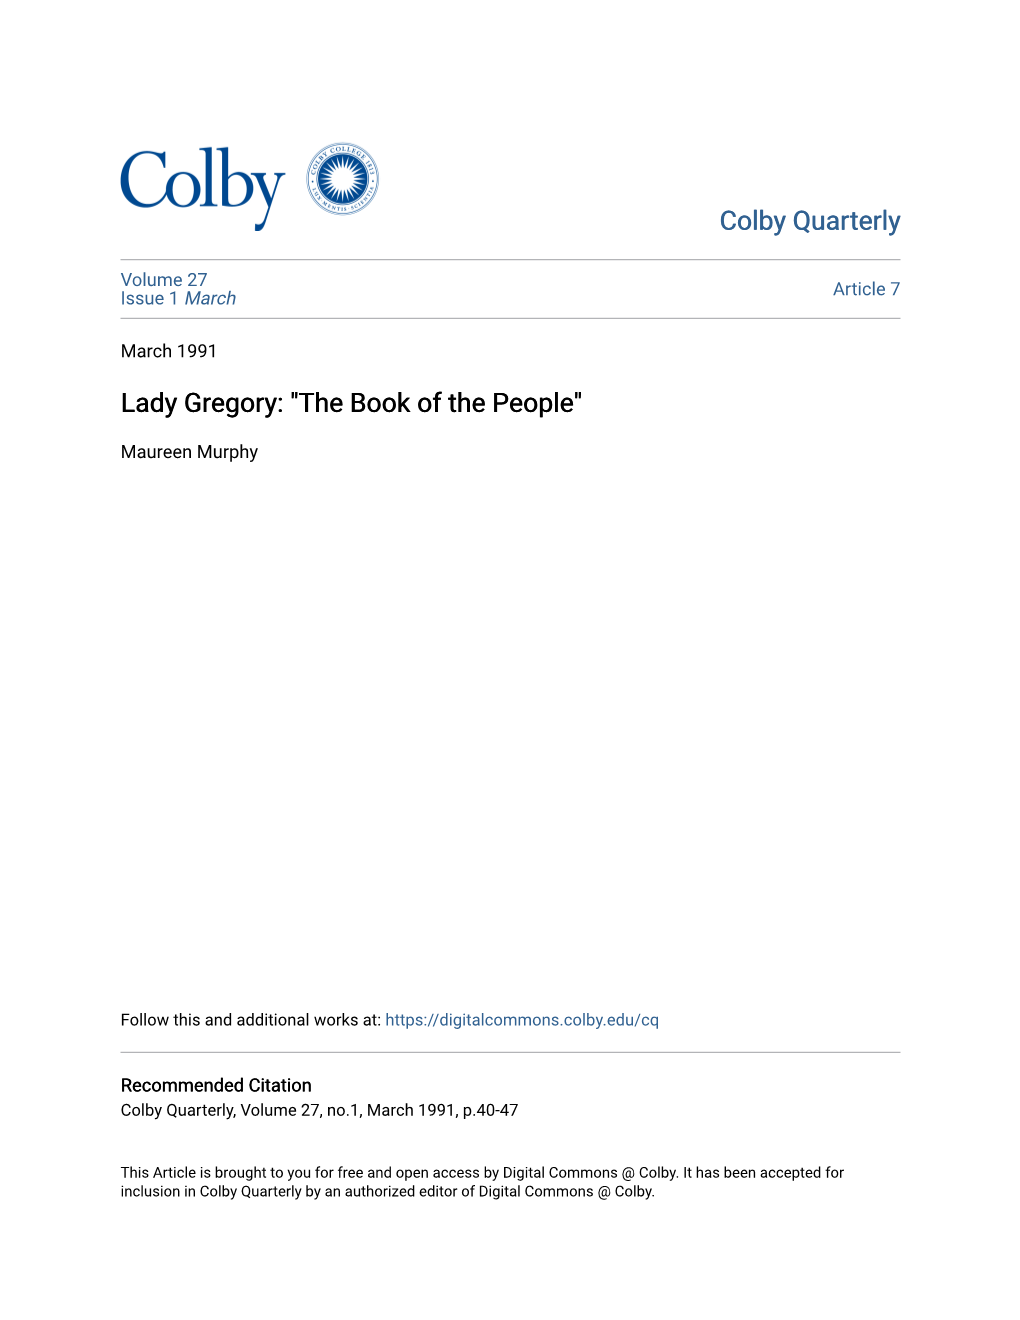 Lady Gregory: "The Book of the People"